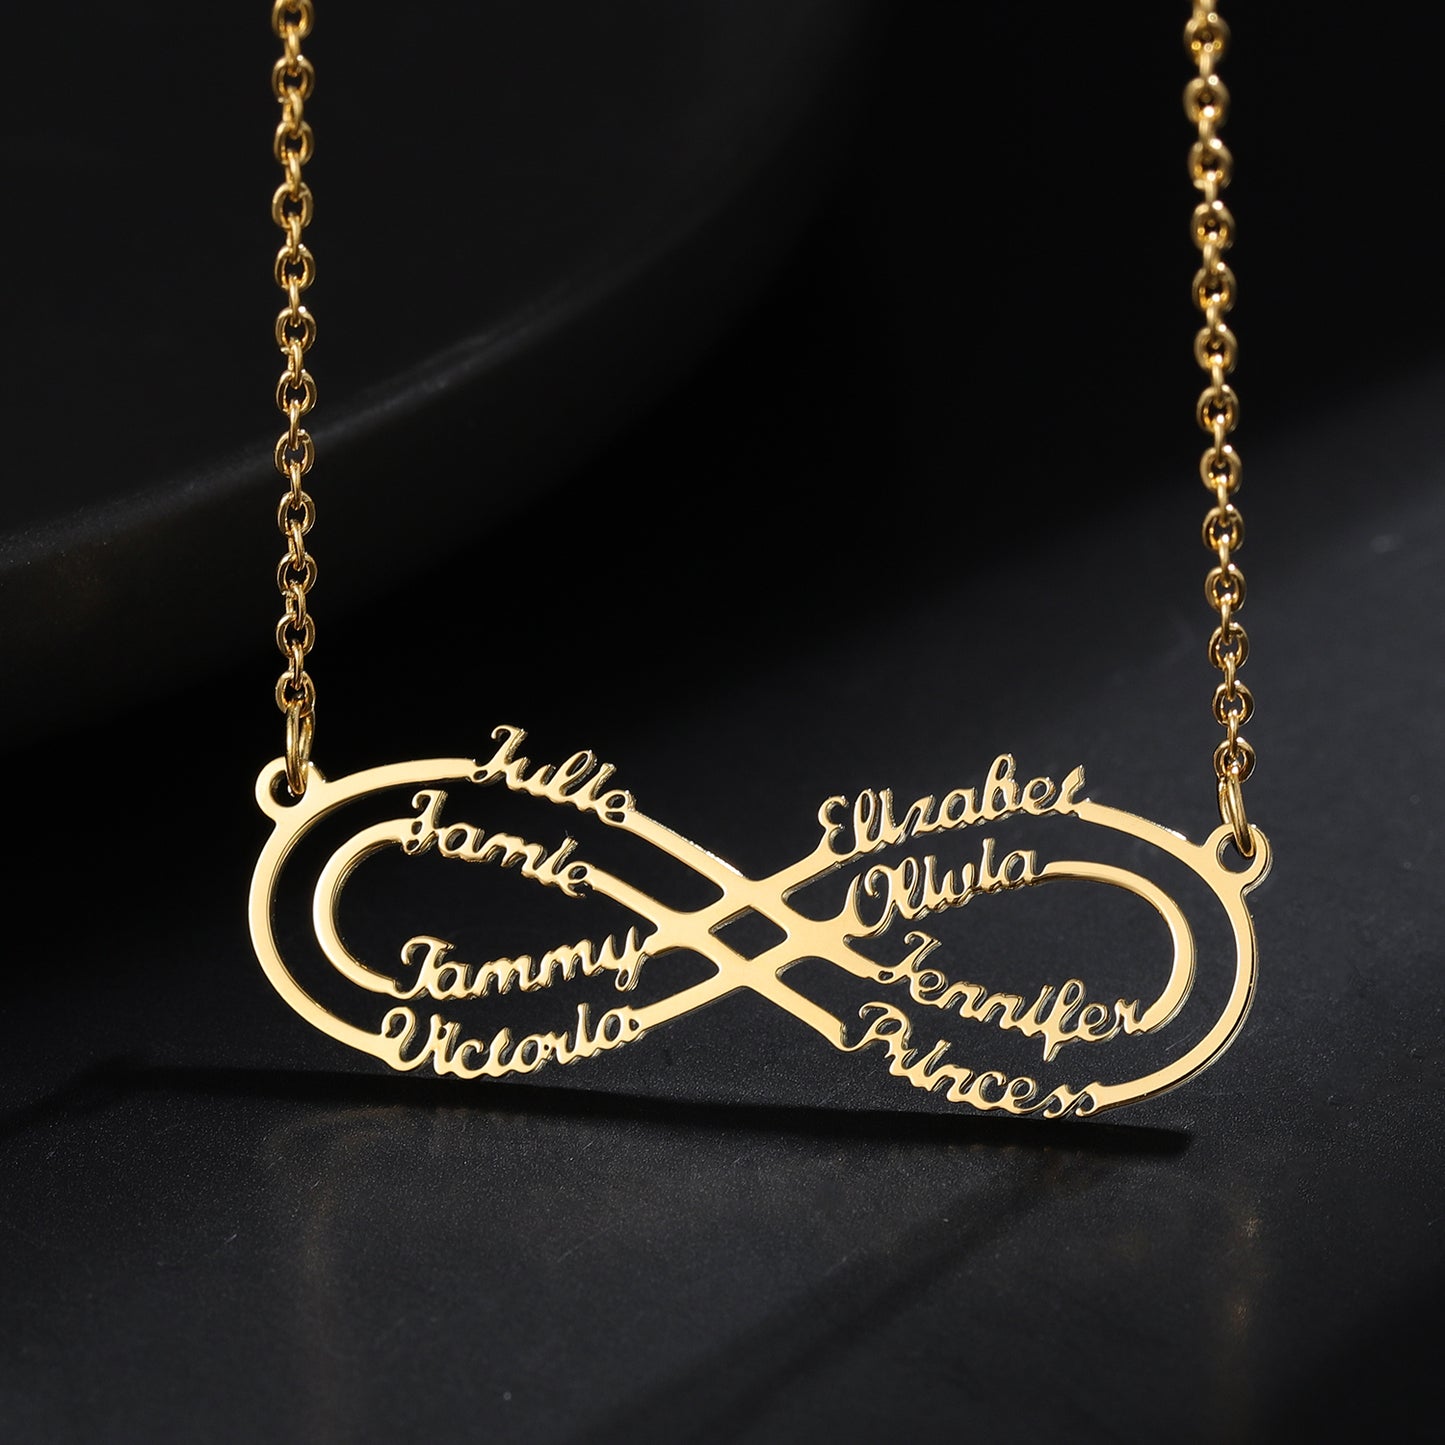 Personalised Custom Name Necklace -  Family Infinity Pendant - Arabic English Forever Jewellery Personal Gifts  -  AIYANNA